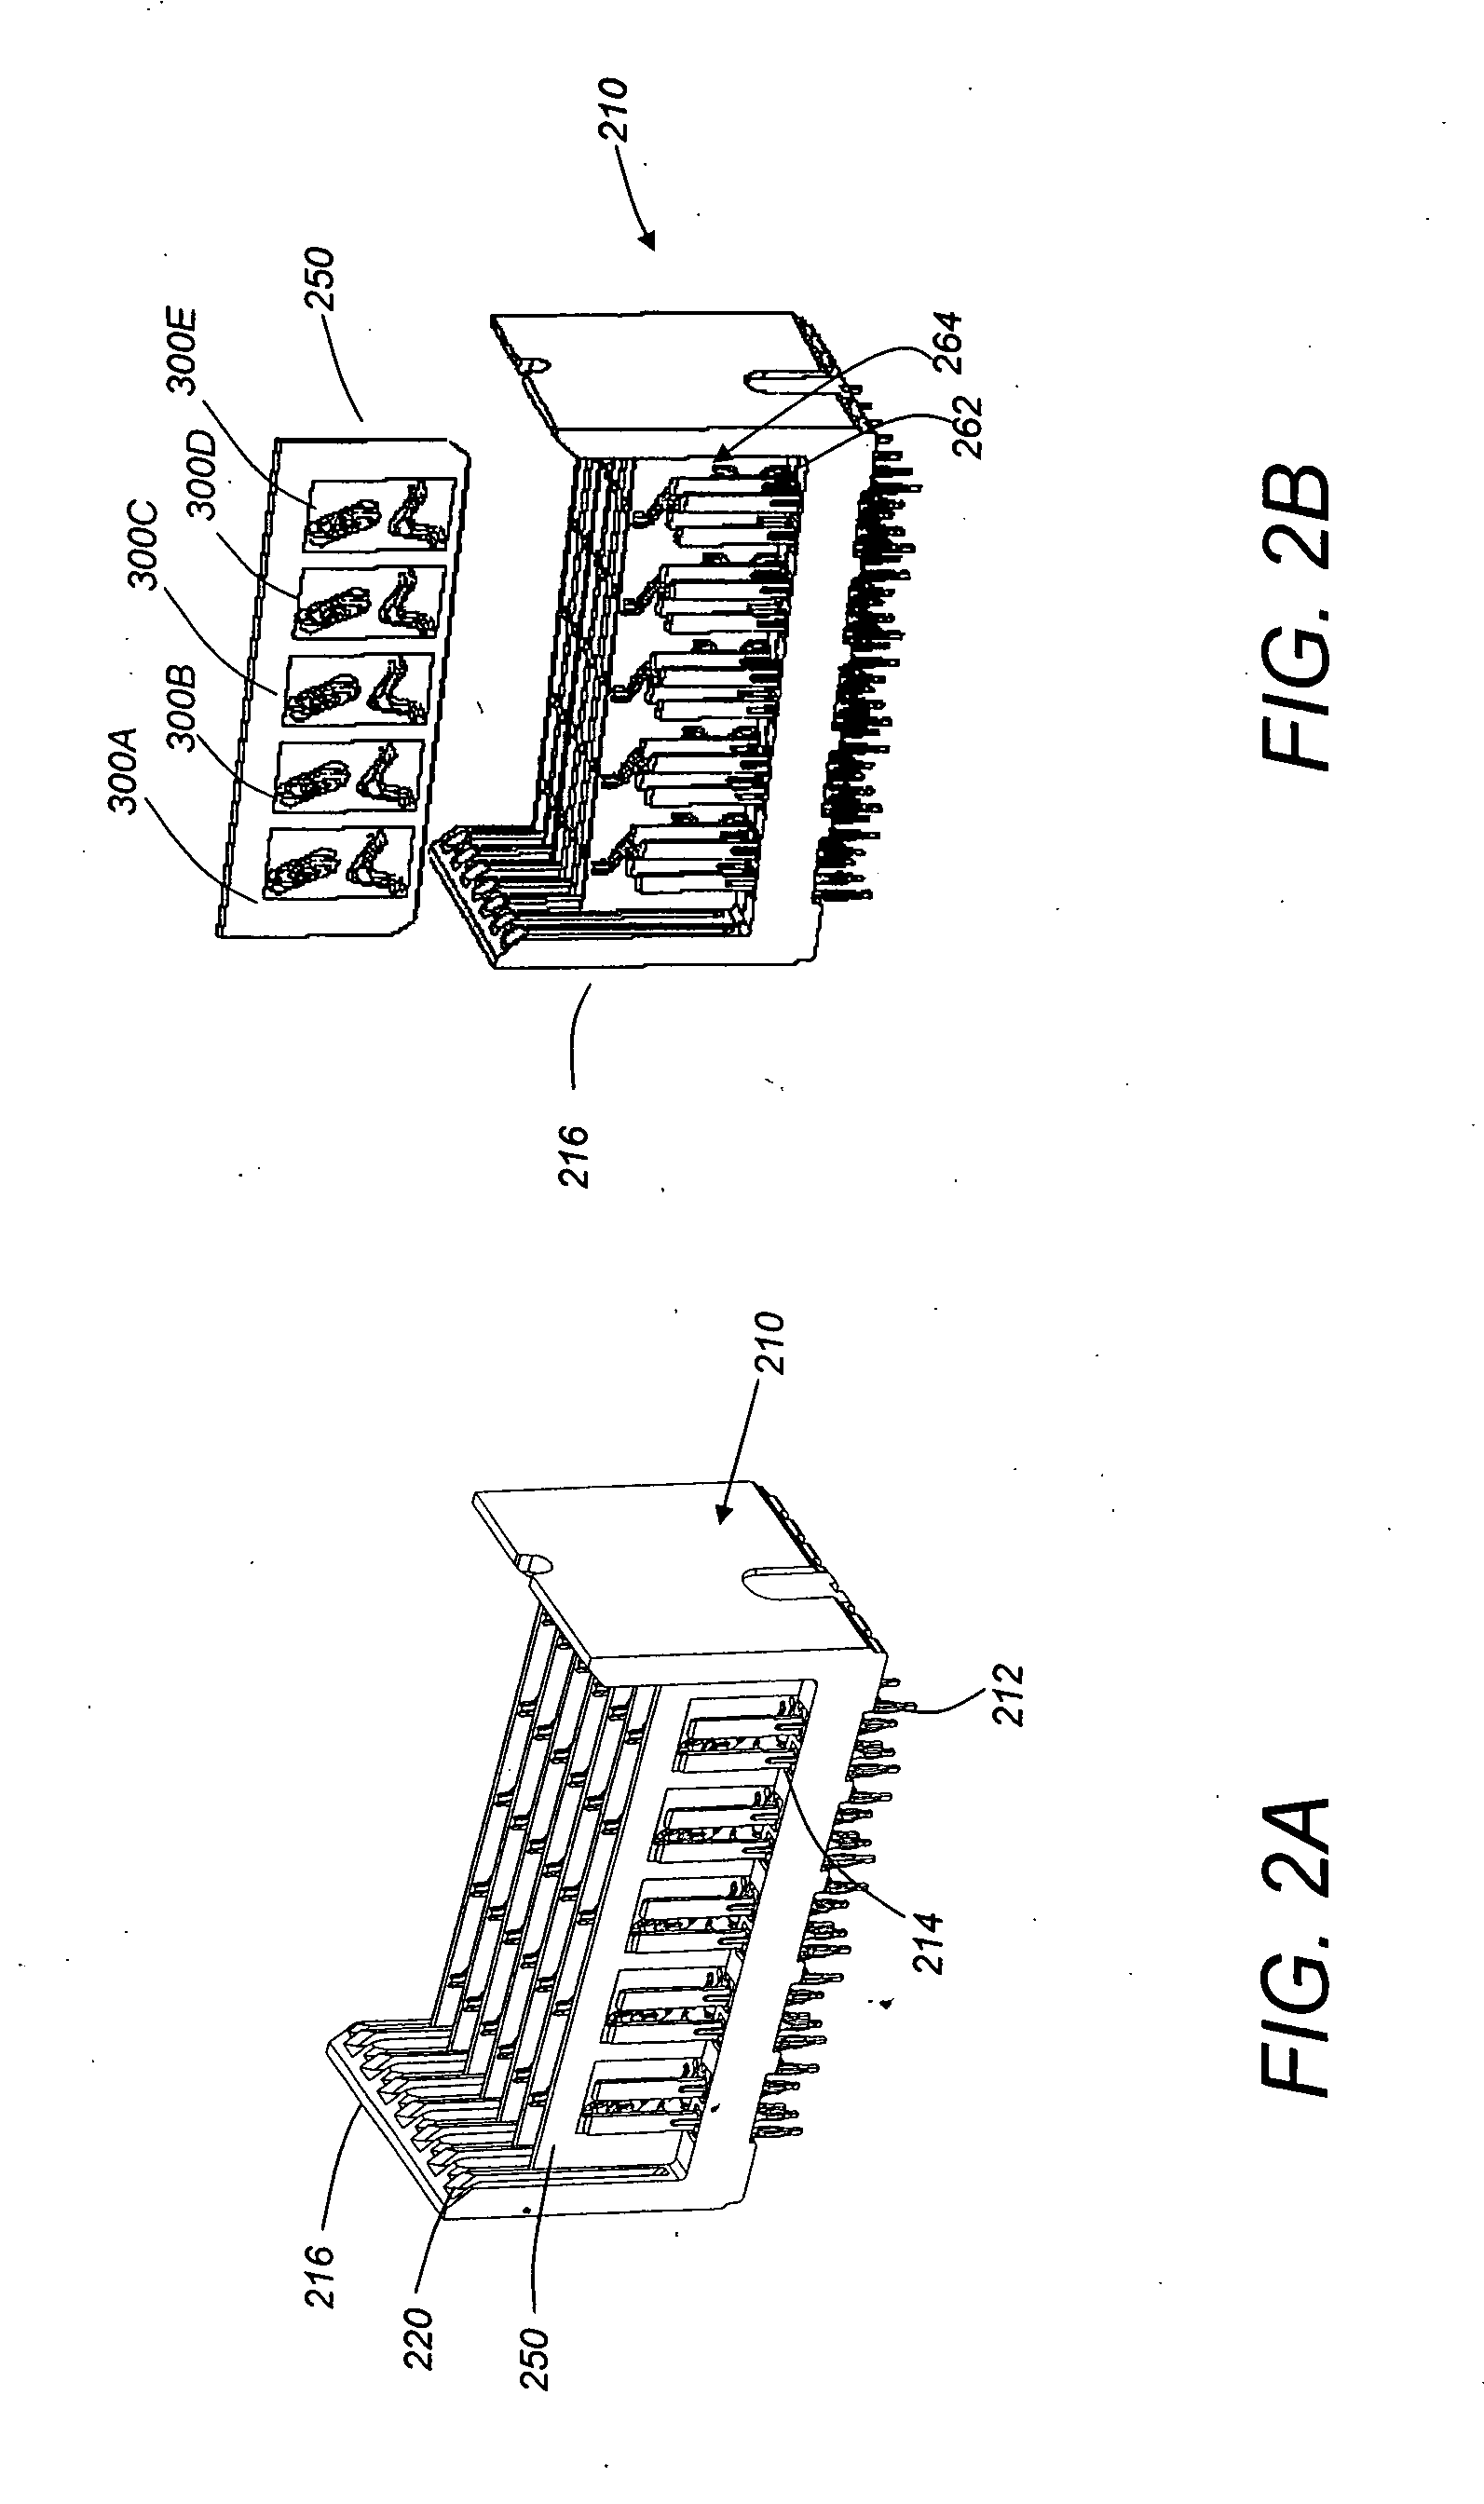 Connector with reference conductor contact